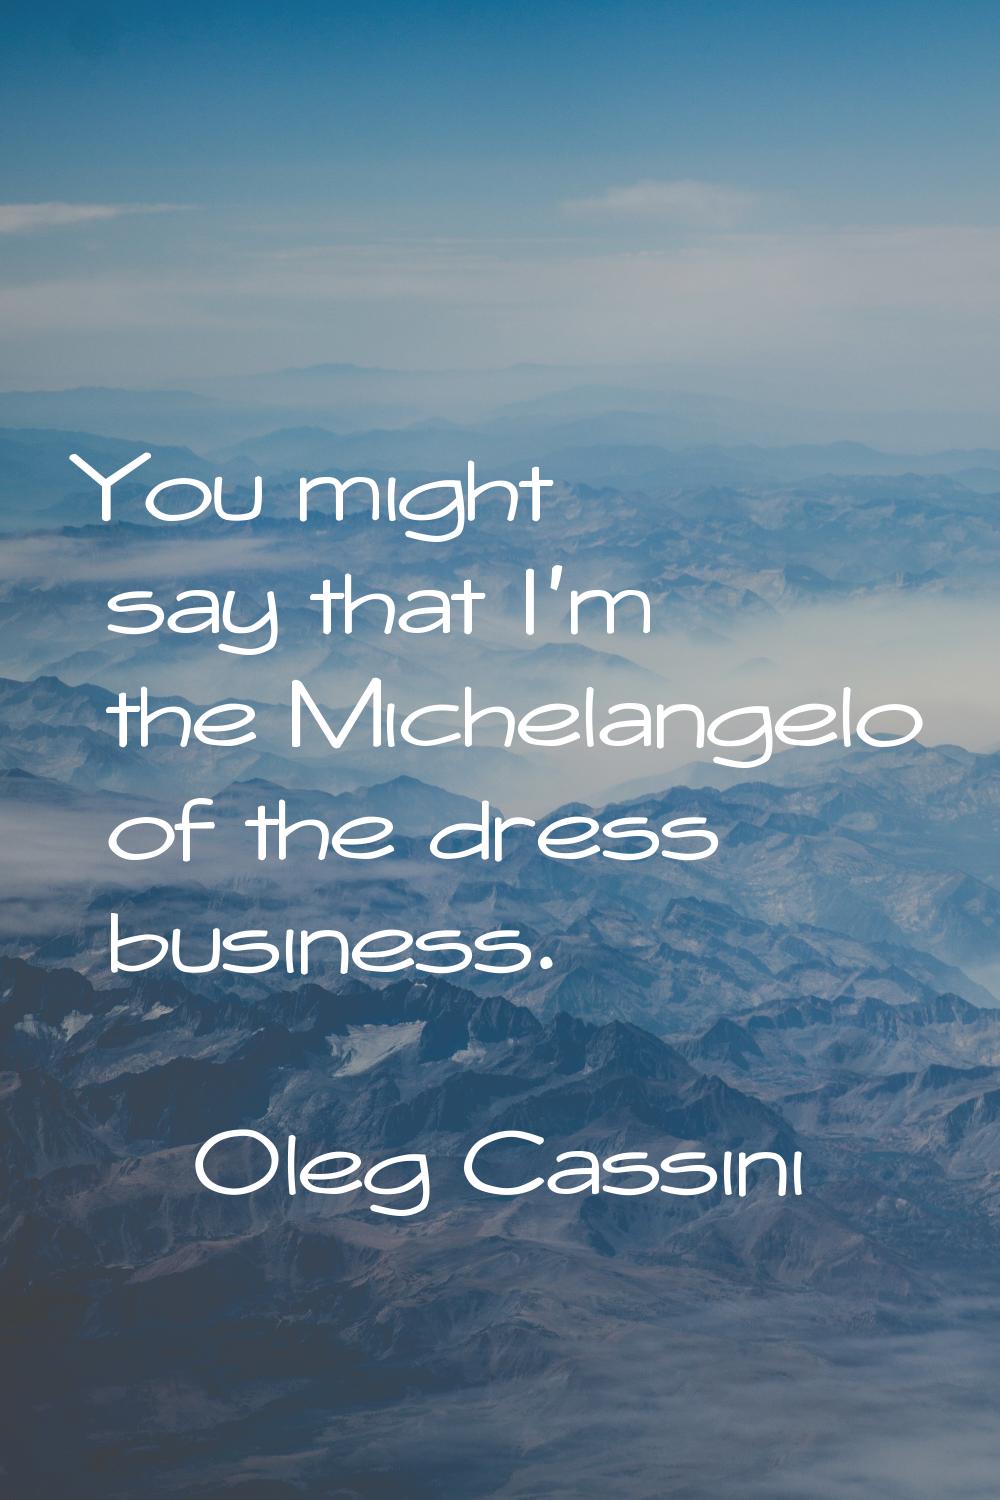 You might say that I'm the Michelangelo of the dress business.